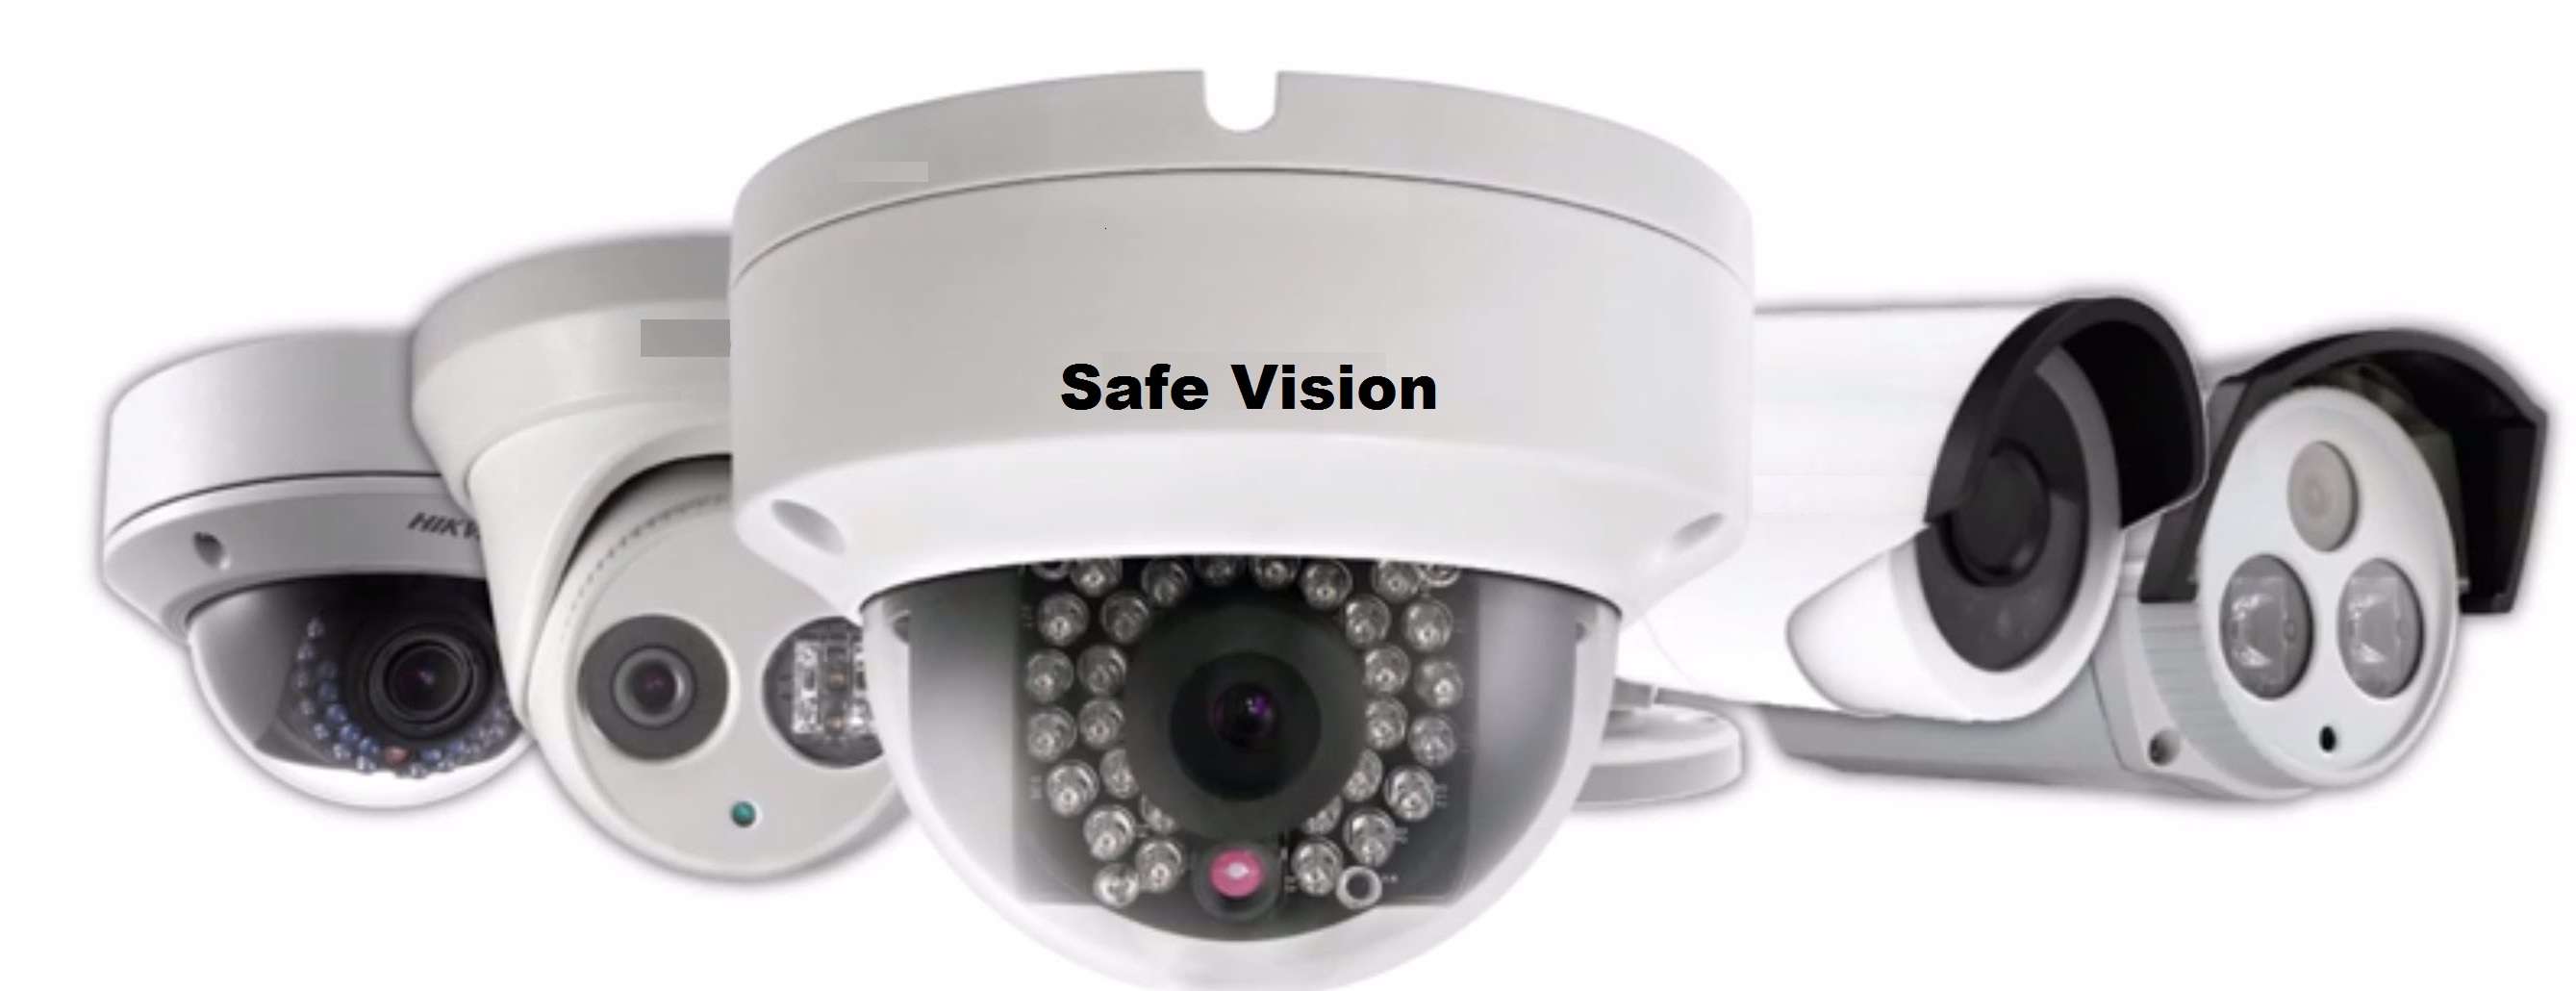 Safe Vision Security Systems